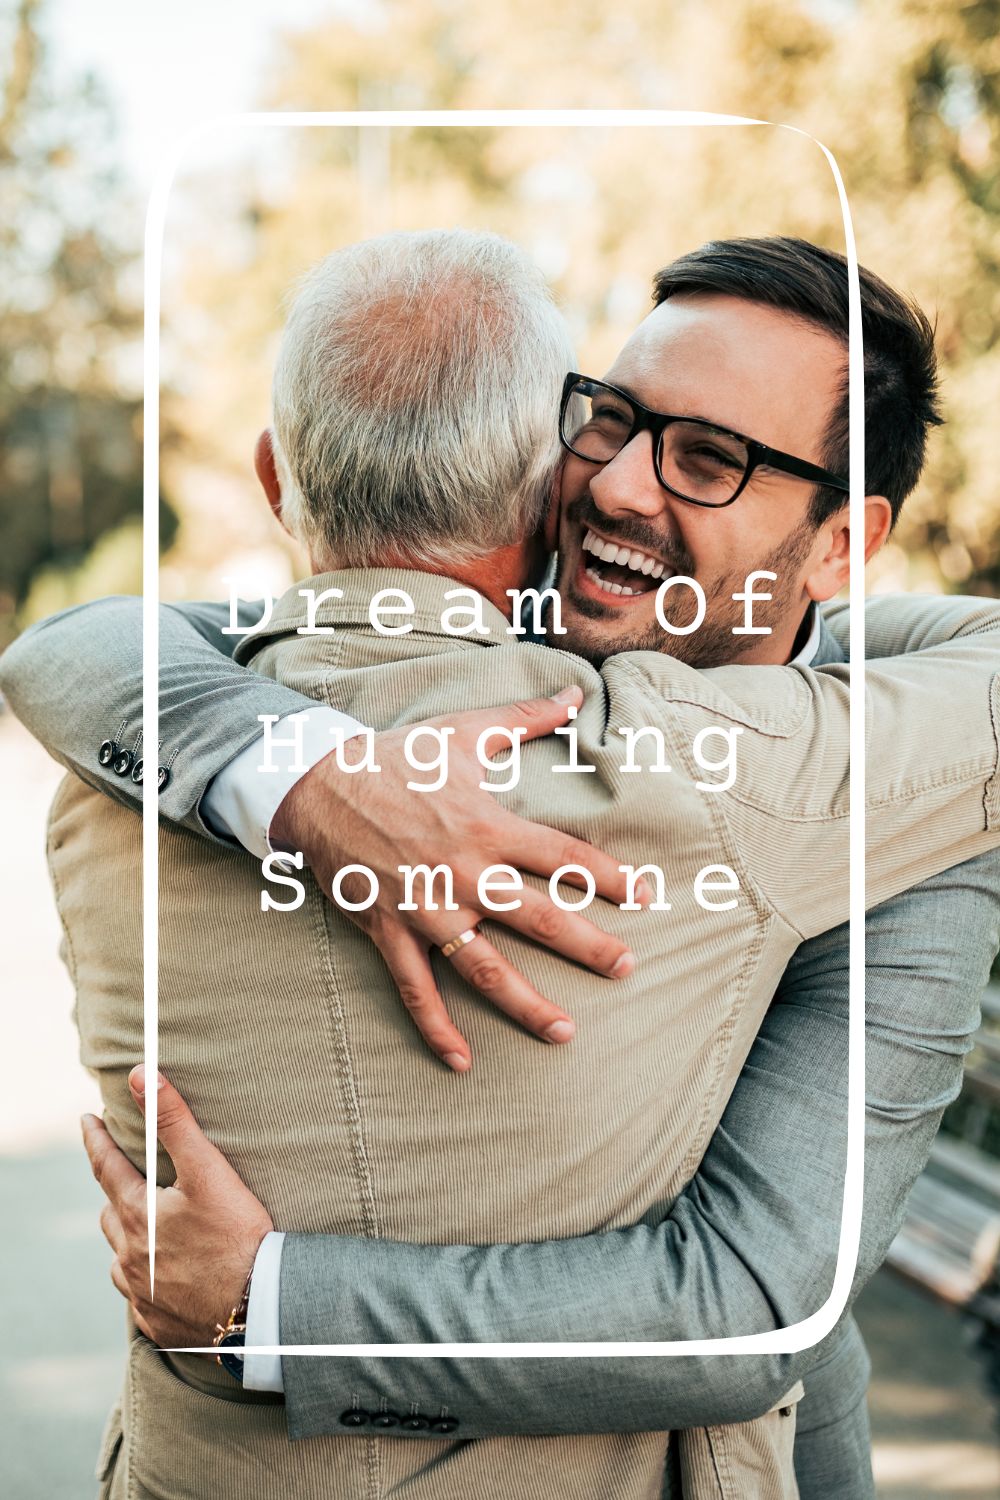 Dream Of Hugging Someone Meanings 1